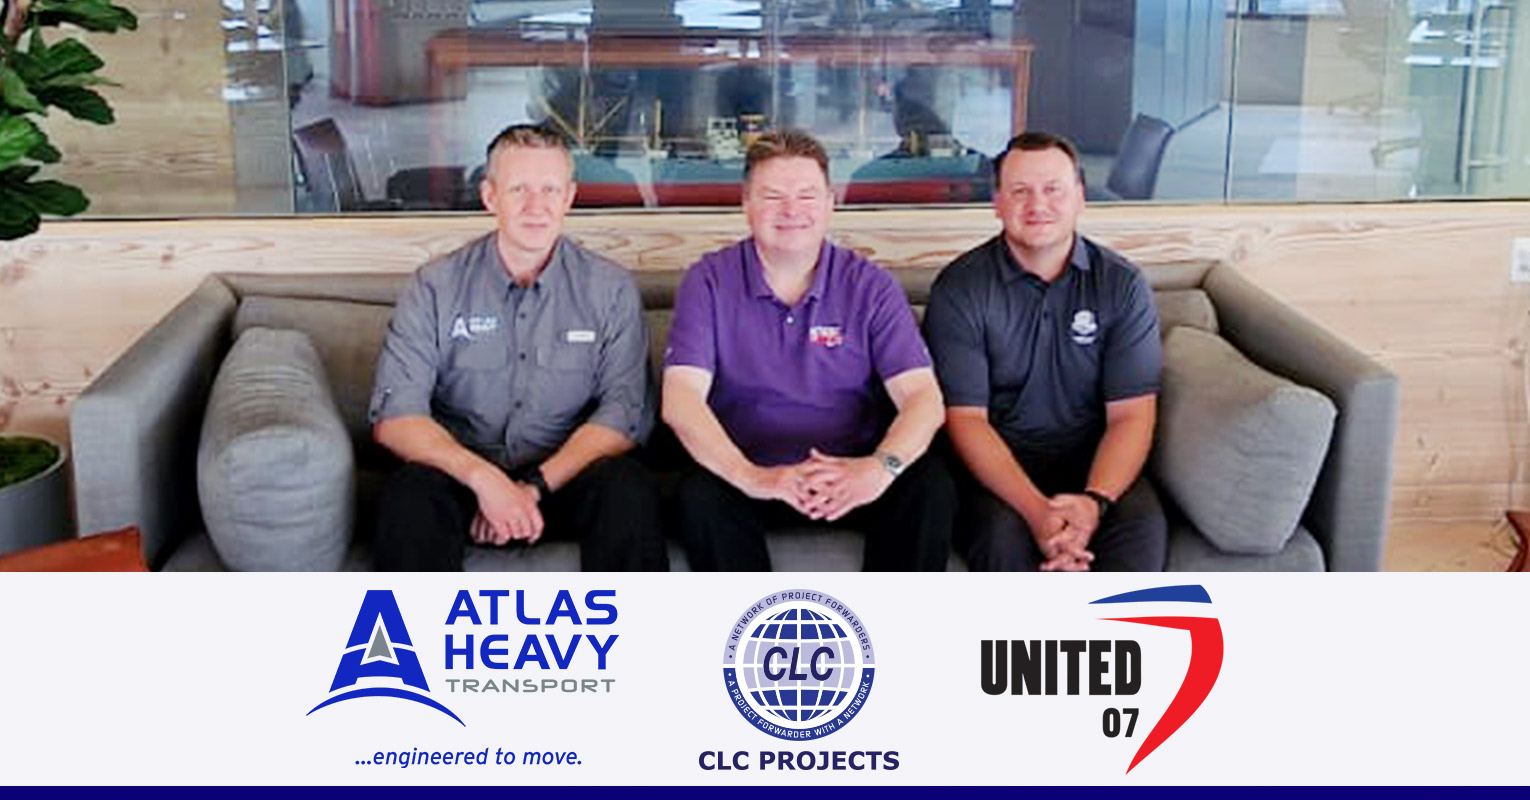 CLC Projects Chairman meeting with Atlas Heavy Transport (CLC Projects Service Provider) and United O7 Americas in Houston